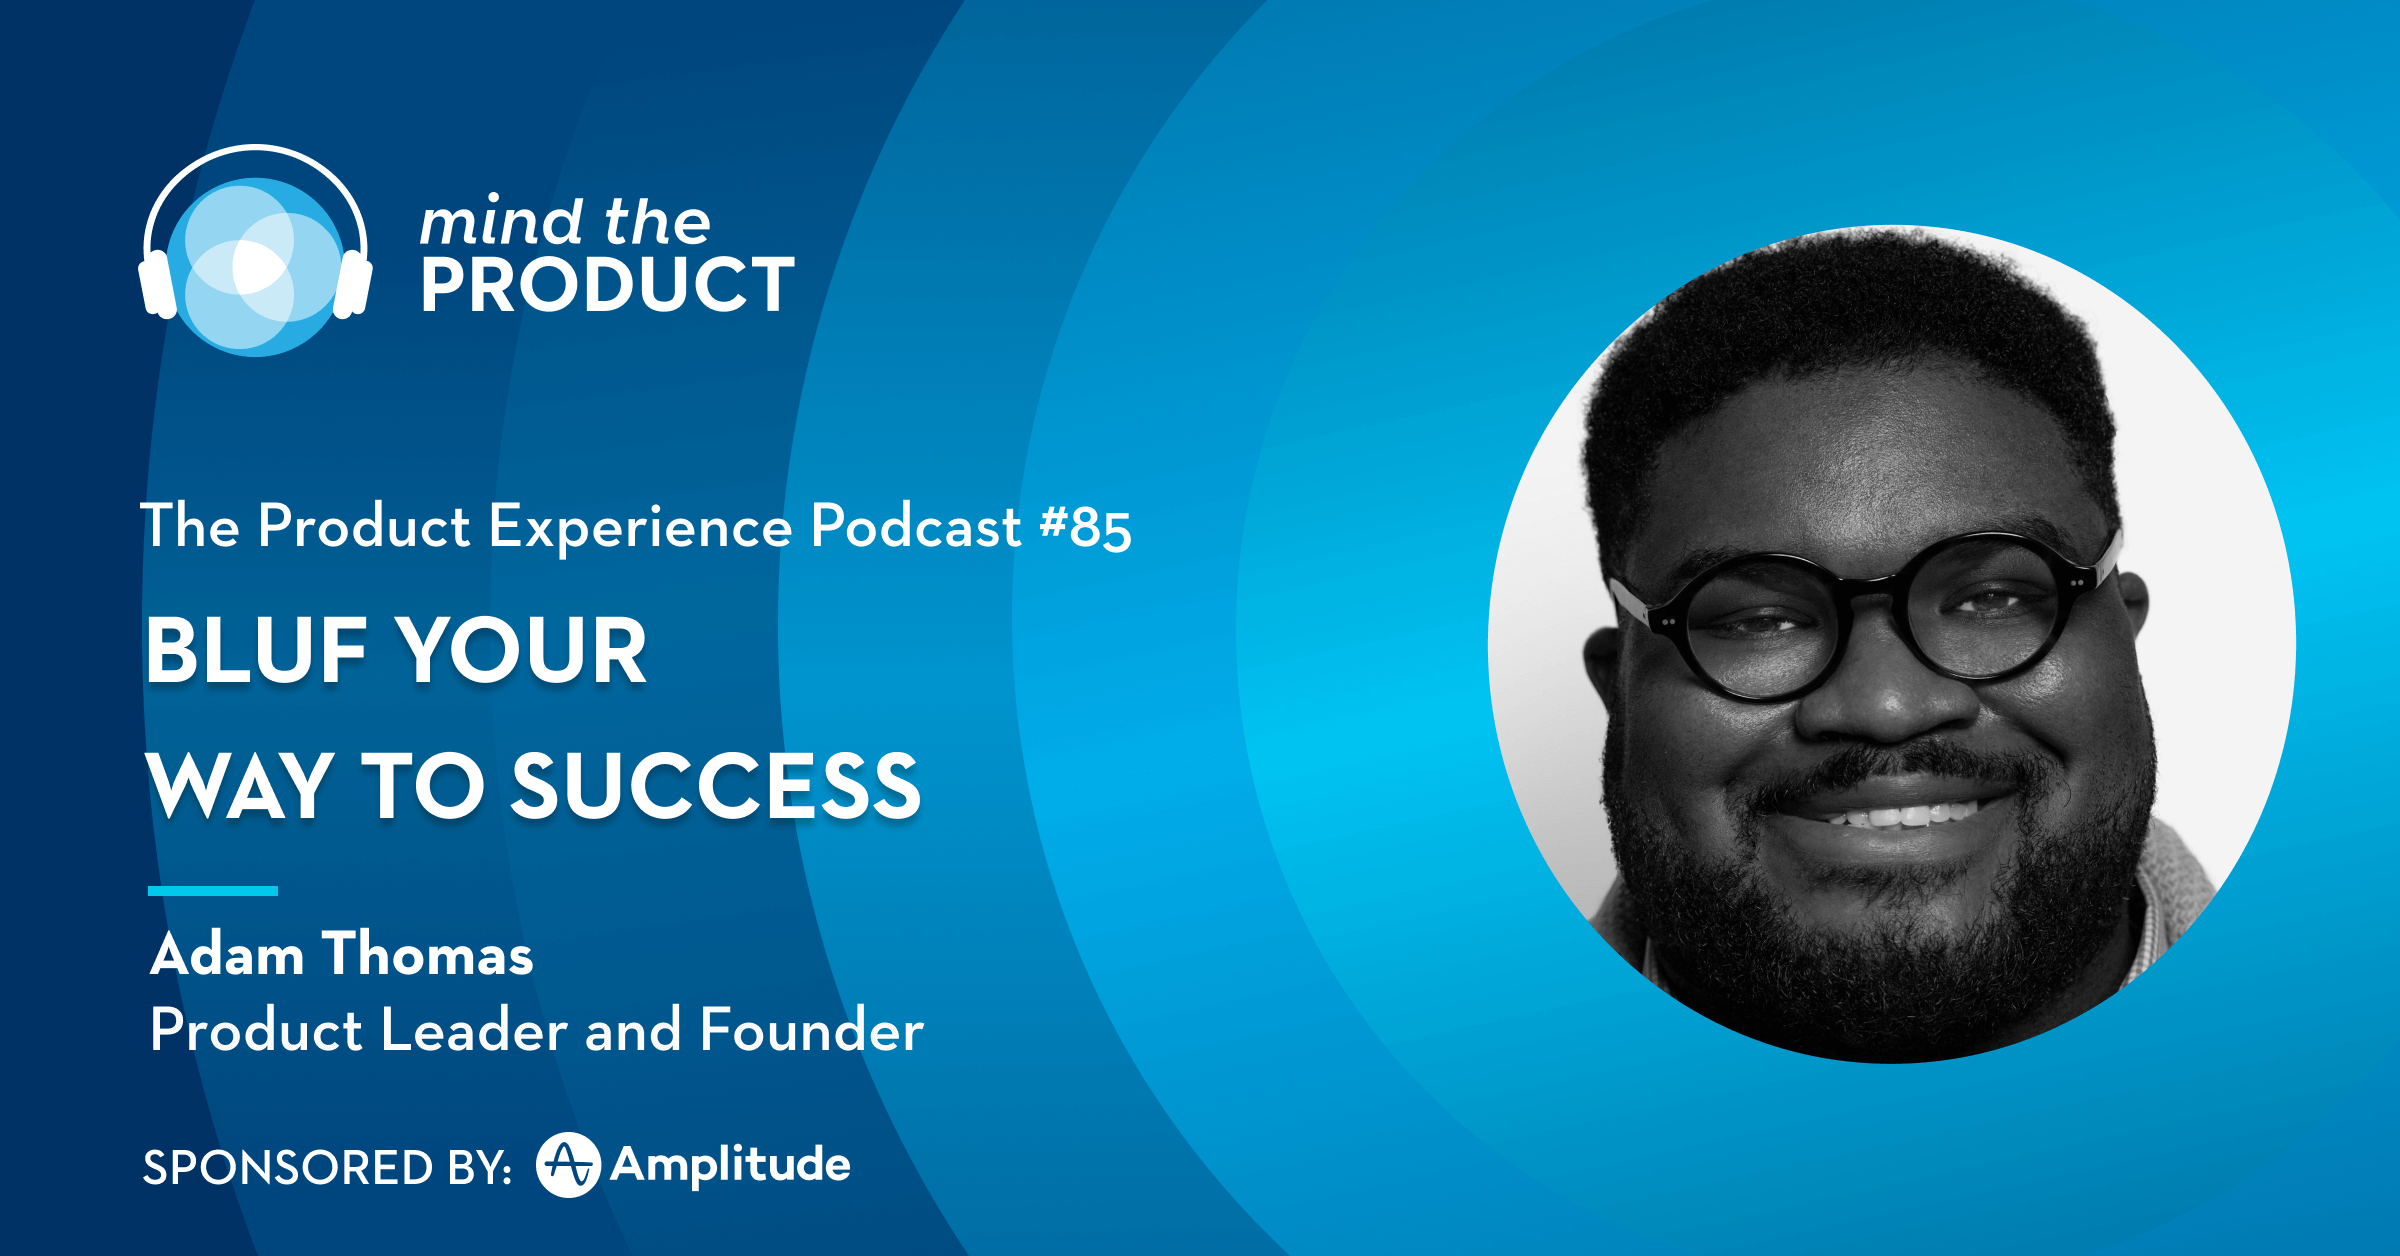 Bluf your way to success – adam thomas on the product experience